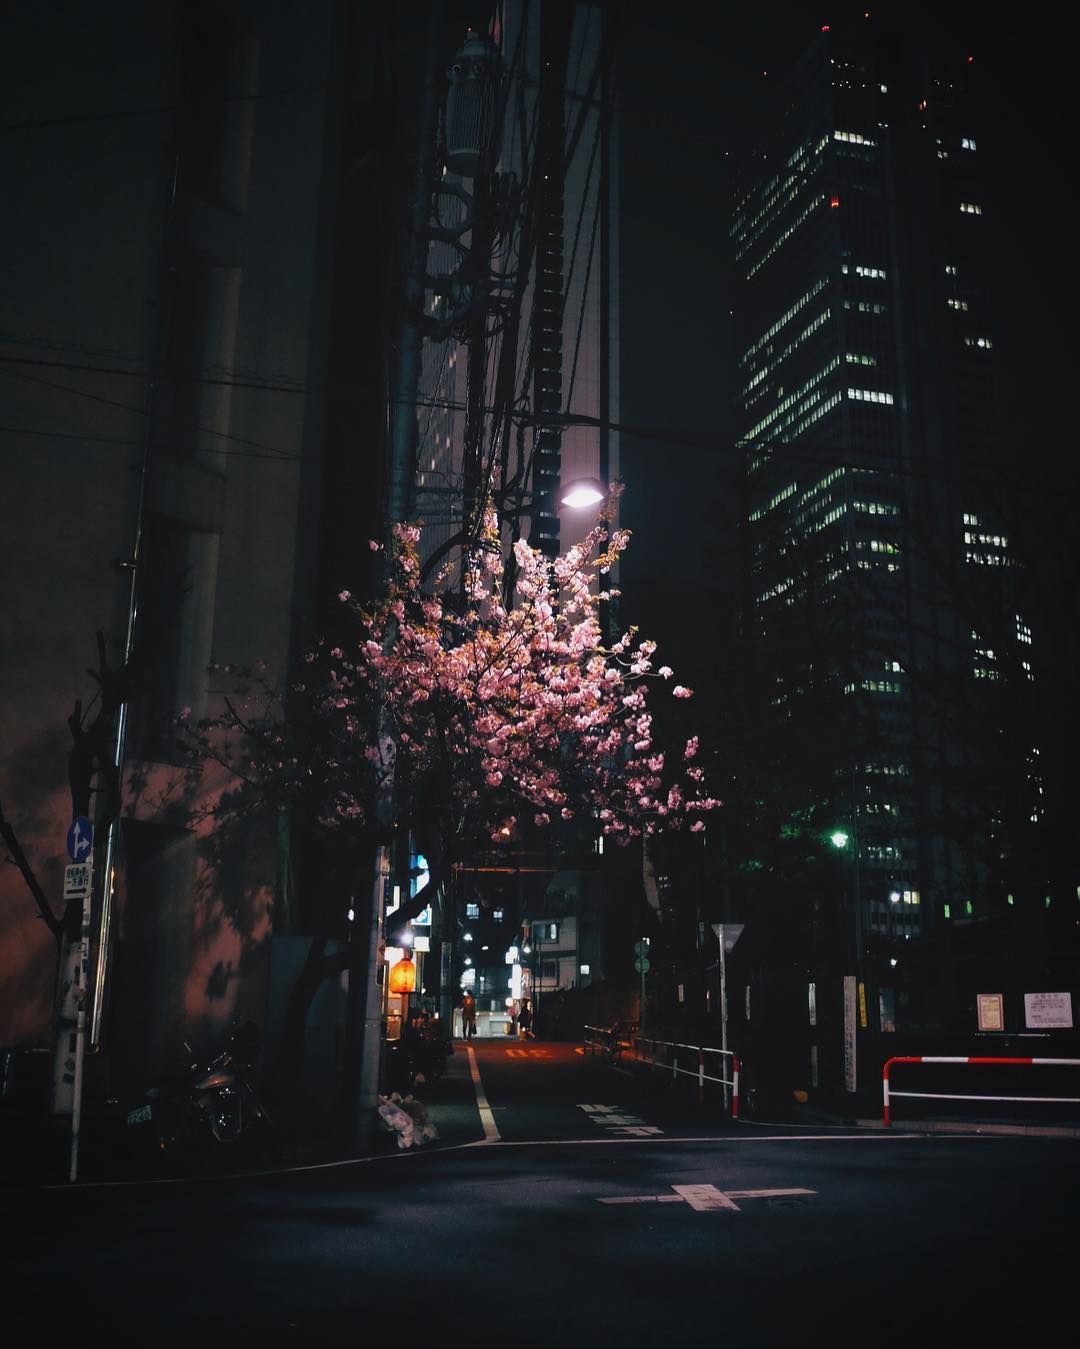 A tree with pink flowers stands in the middle of a city street at night. - Anime city